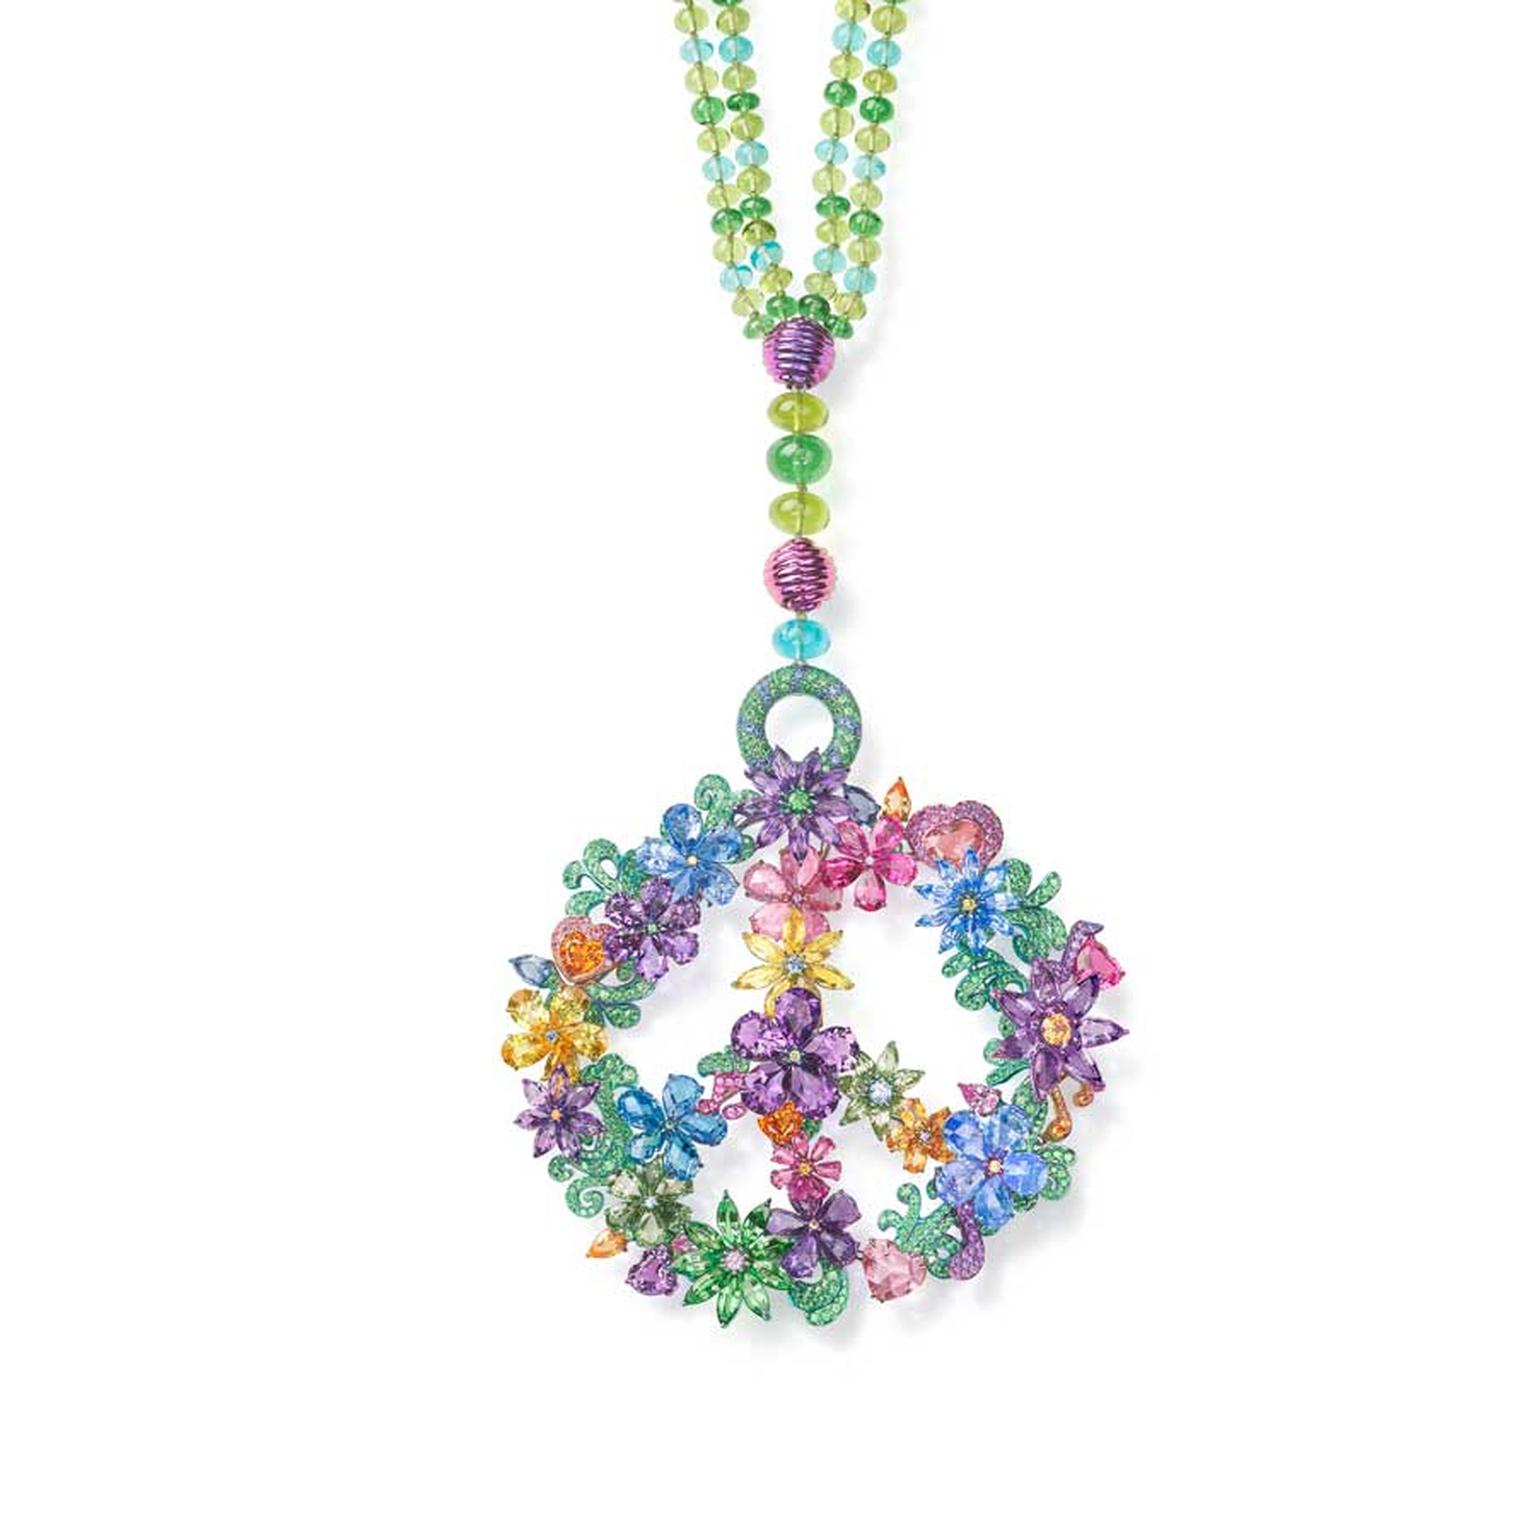 Chopard Peace and Love necklace Chopard Loves Cinema Red Carpet collection